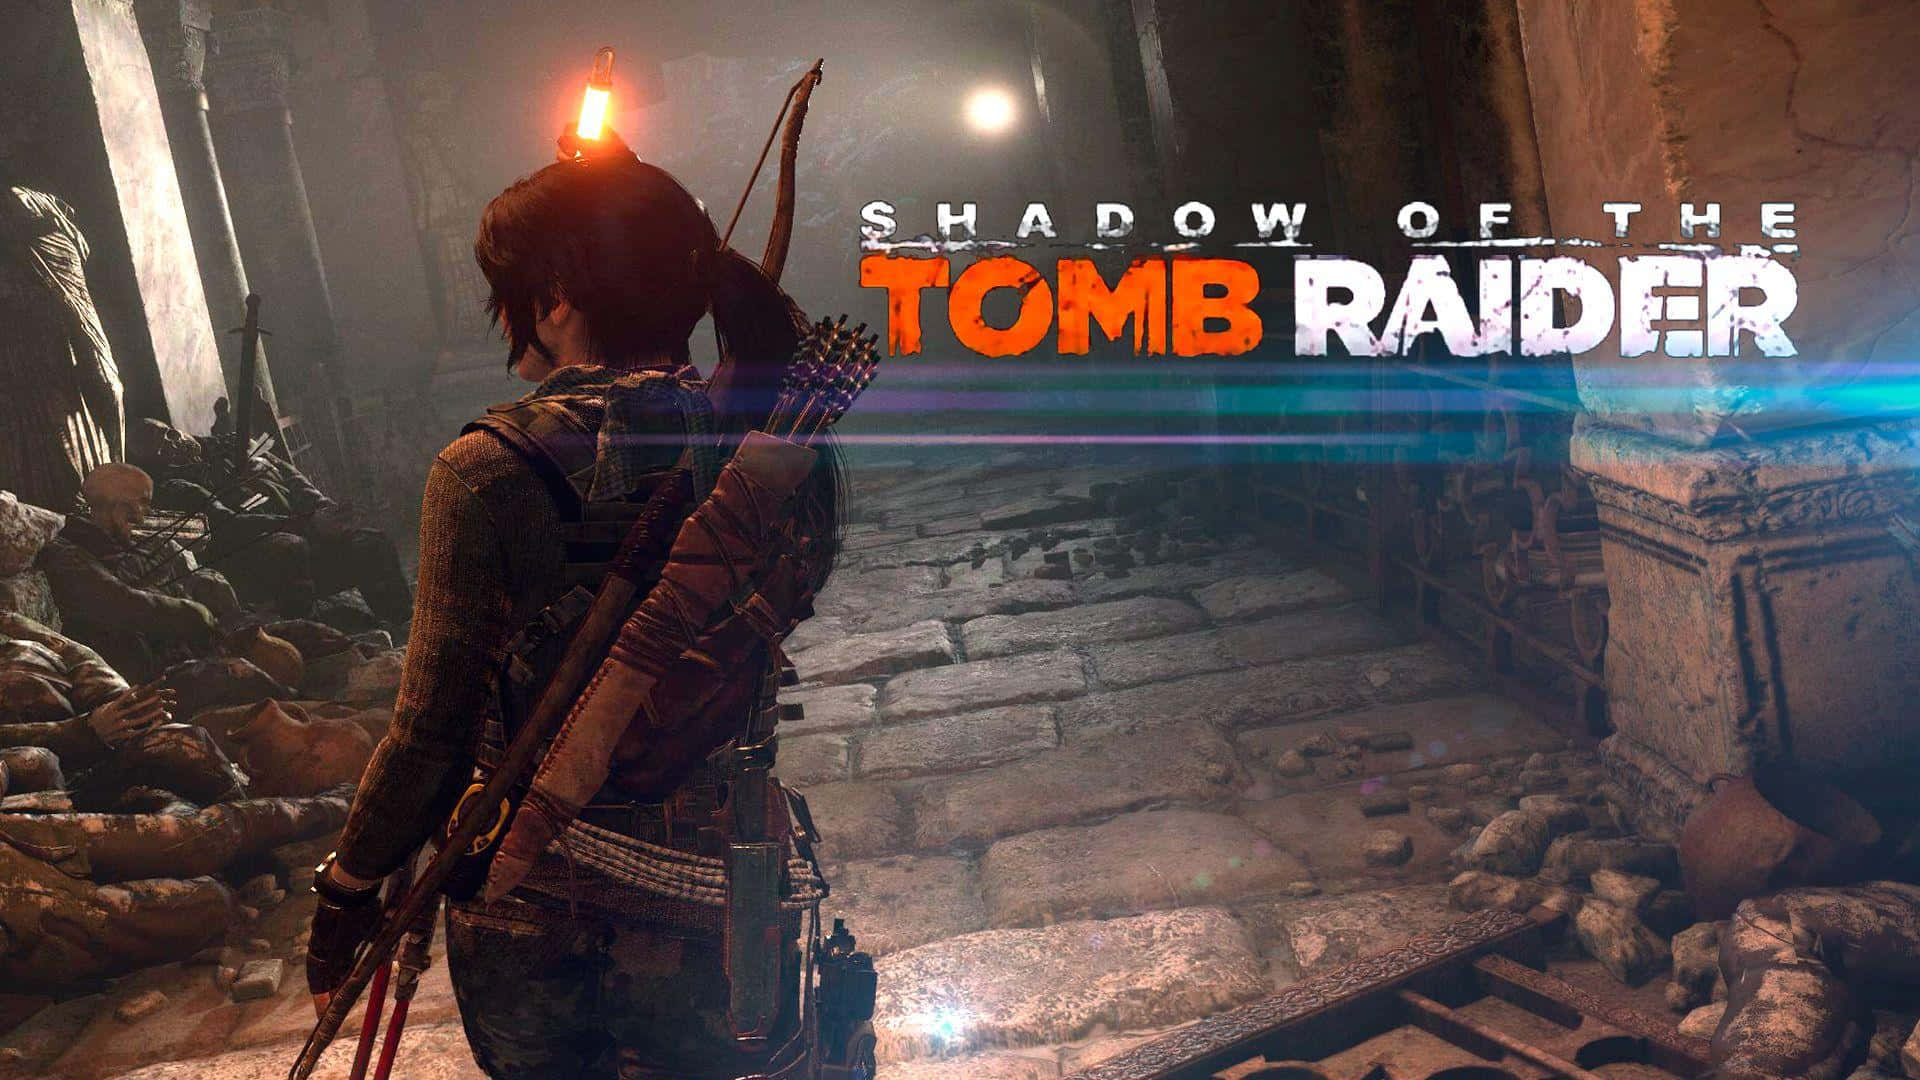 Lara Croft in The Best Shadow Of The Tomb Raider